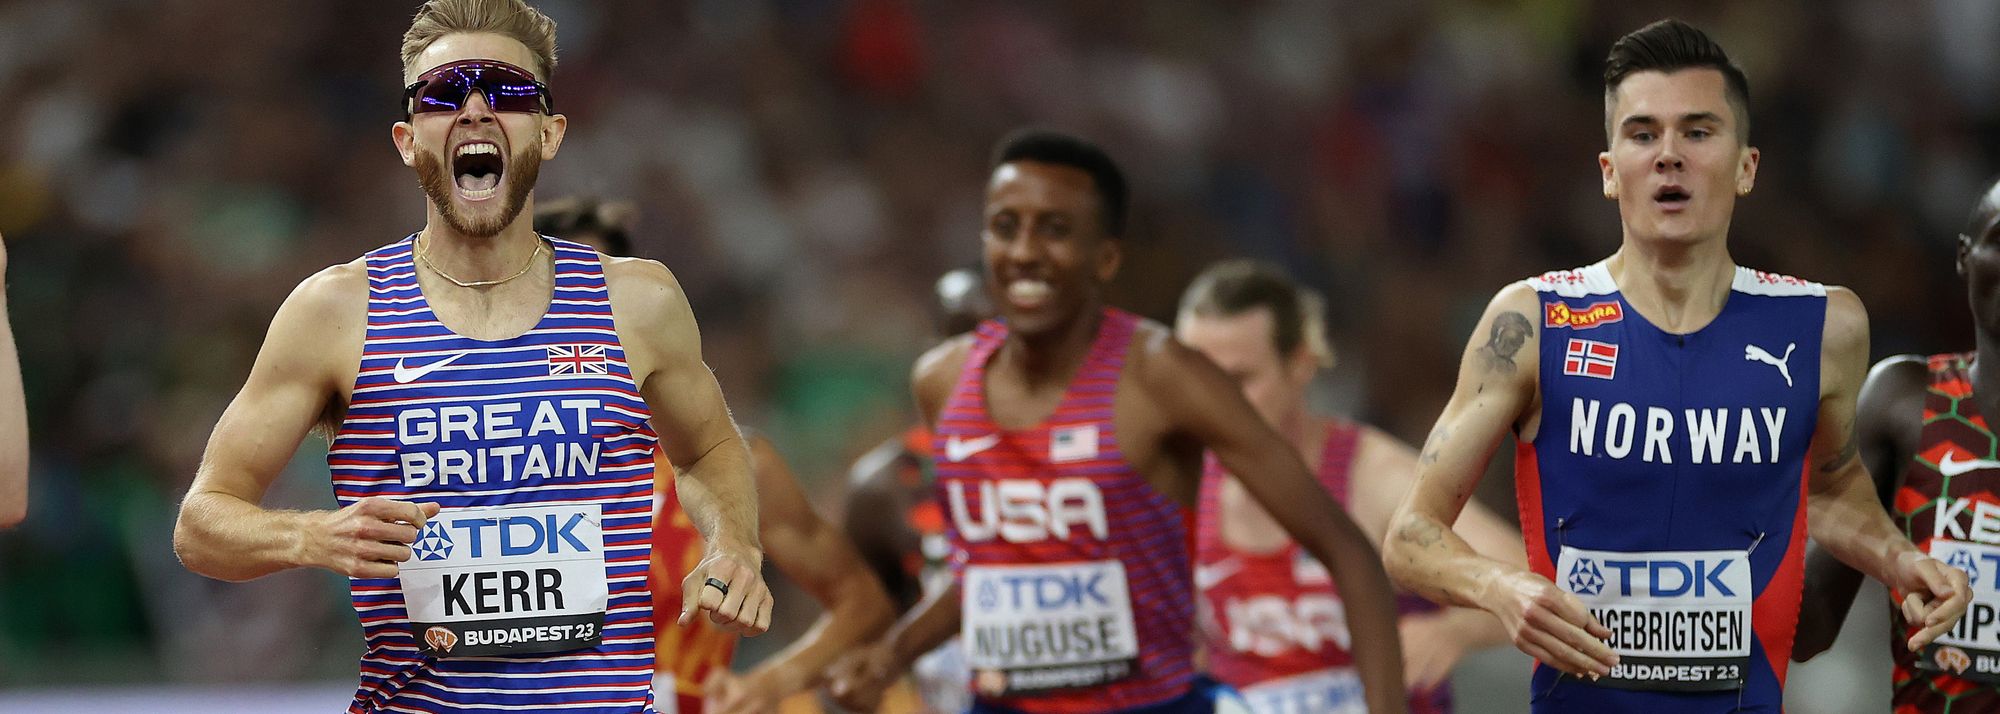 Josh Kerr, Jakob Ingebrigtsen and Yared Nuguse all announced for the Prefontaine Classic – this season’s fifth Wanda Diamond League meeting